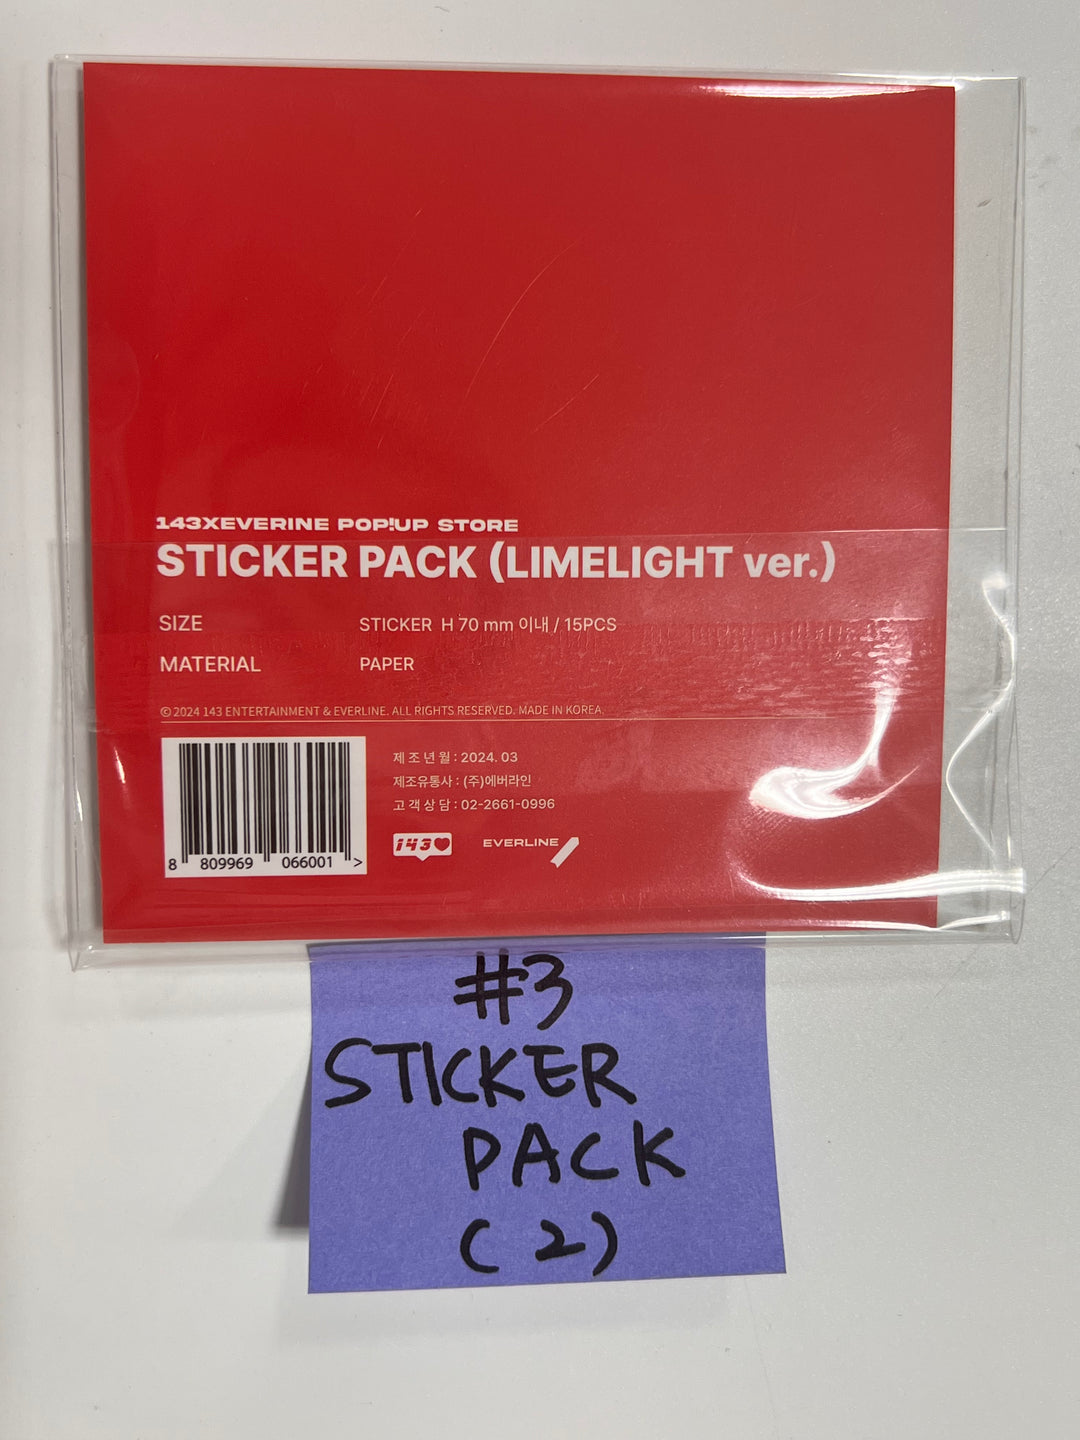 LIMELIGHT - "143 POP! Up Store" Official MD (Message Pop-Up Card, Sticker Pack, Acrylic Keyring, Mini Pouch, Ring) [24.03.08]